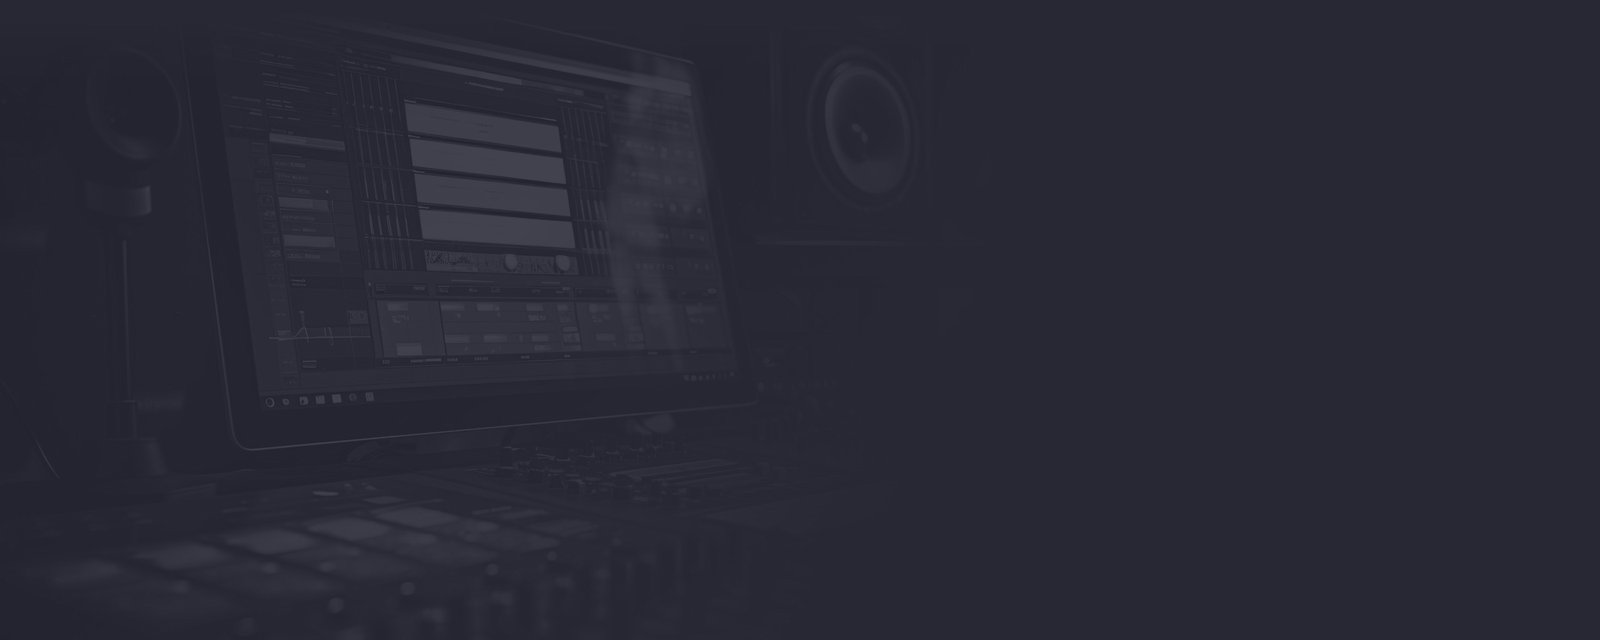 Online Audio Mixing and Mastering Professional Services